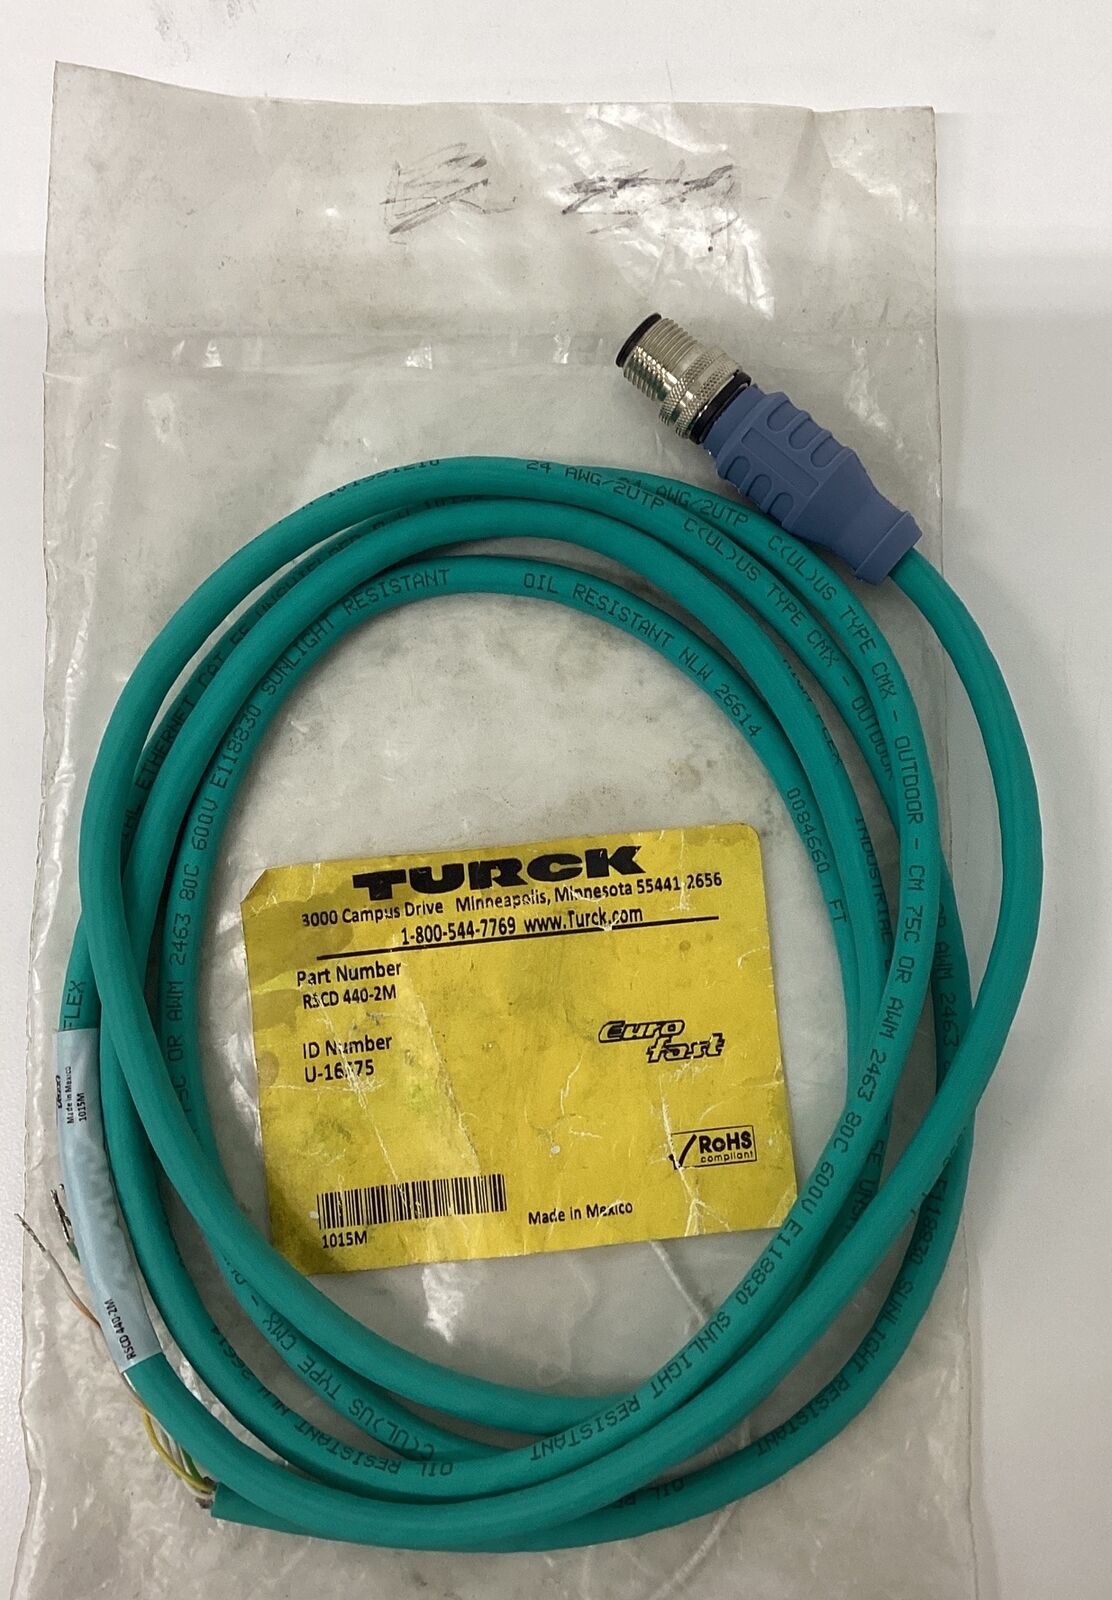 Turck RSCD 440-2M Network Cable 4-Pin to Wire 2-Meters NEW (CL186) - 0